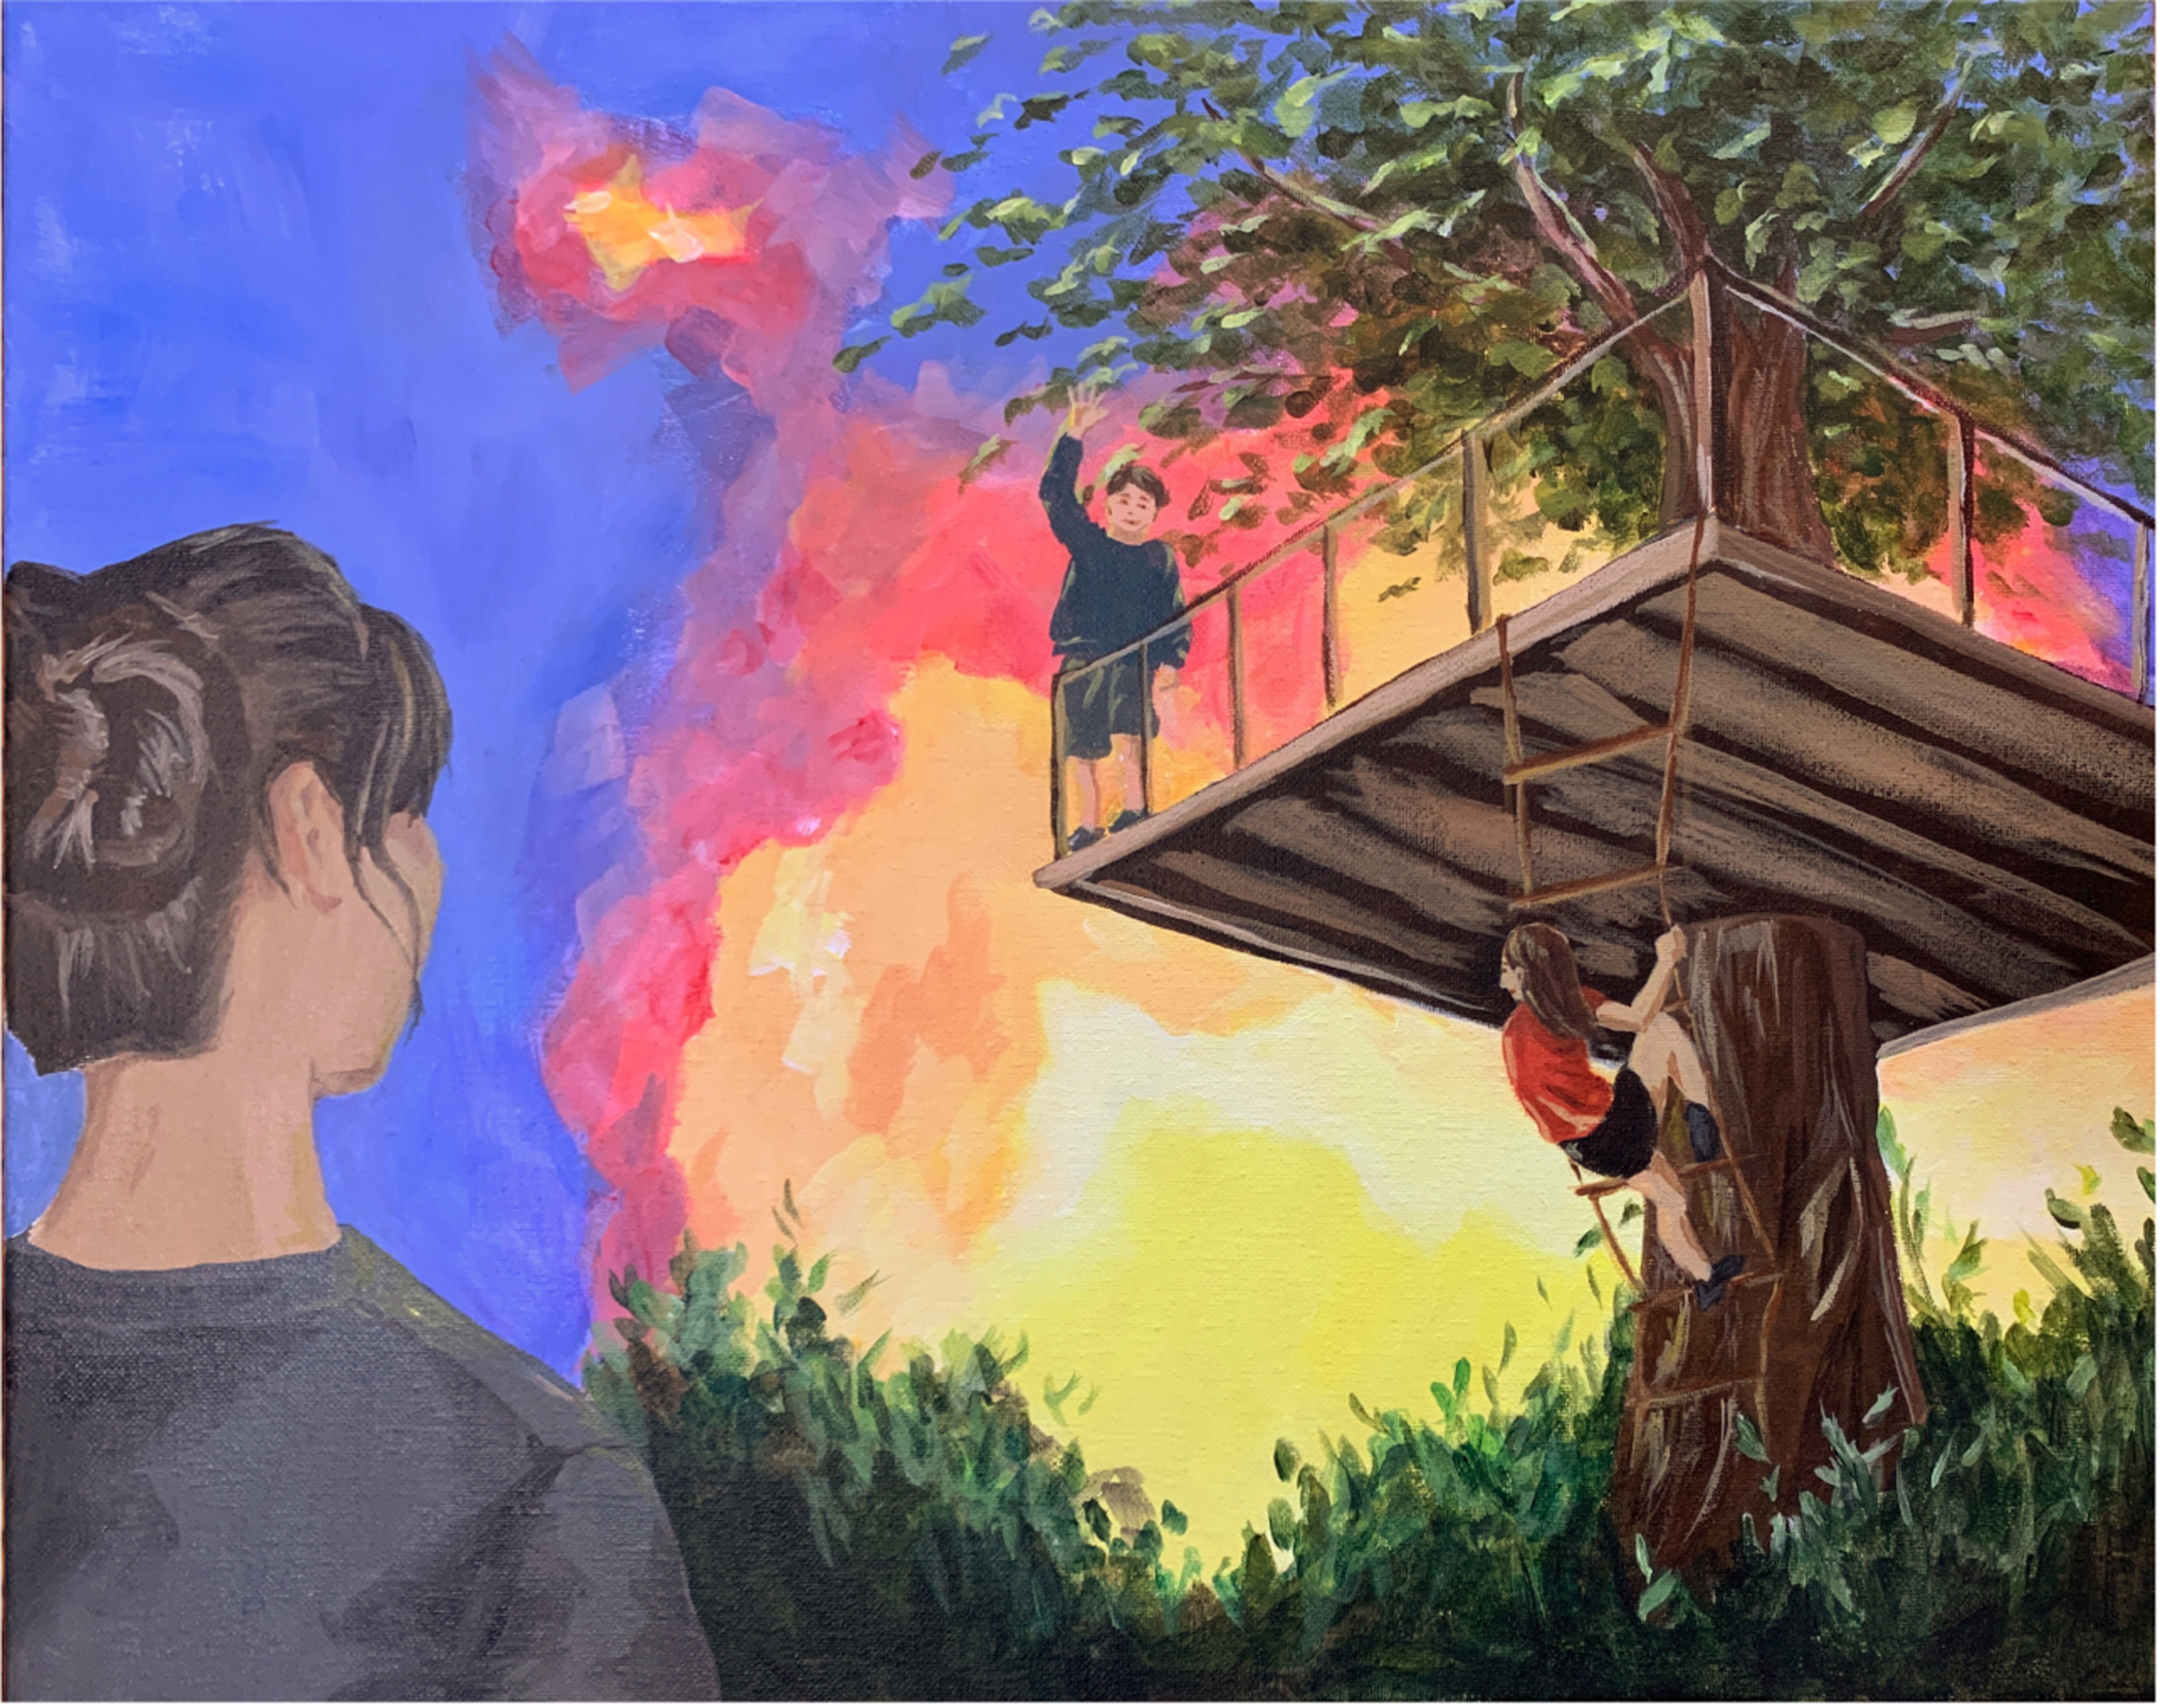 Illustration of a mother watching kids climb into and play in a tree house, against a setting sun